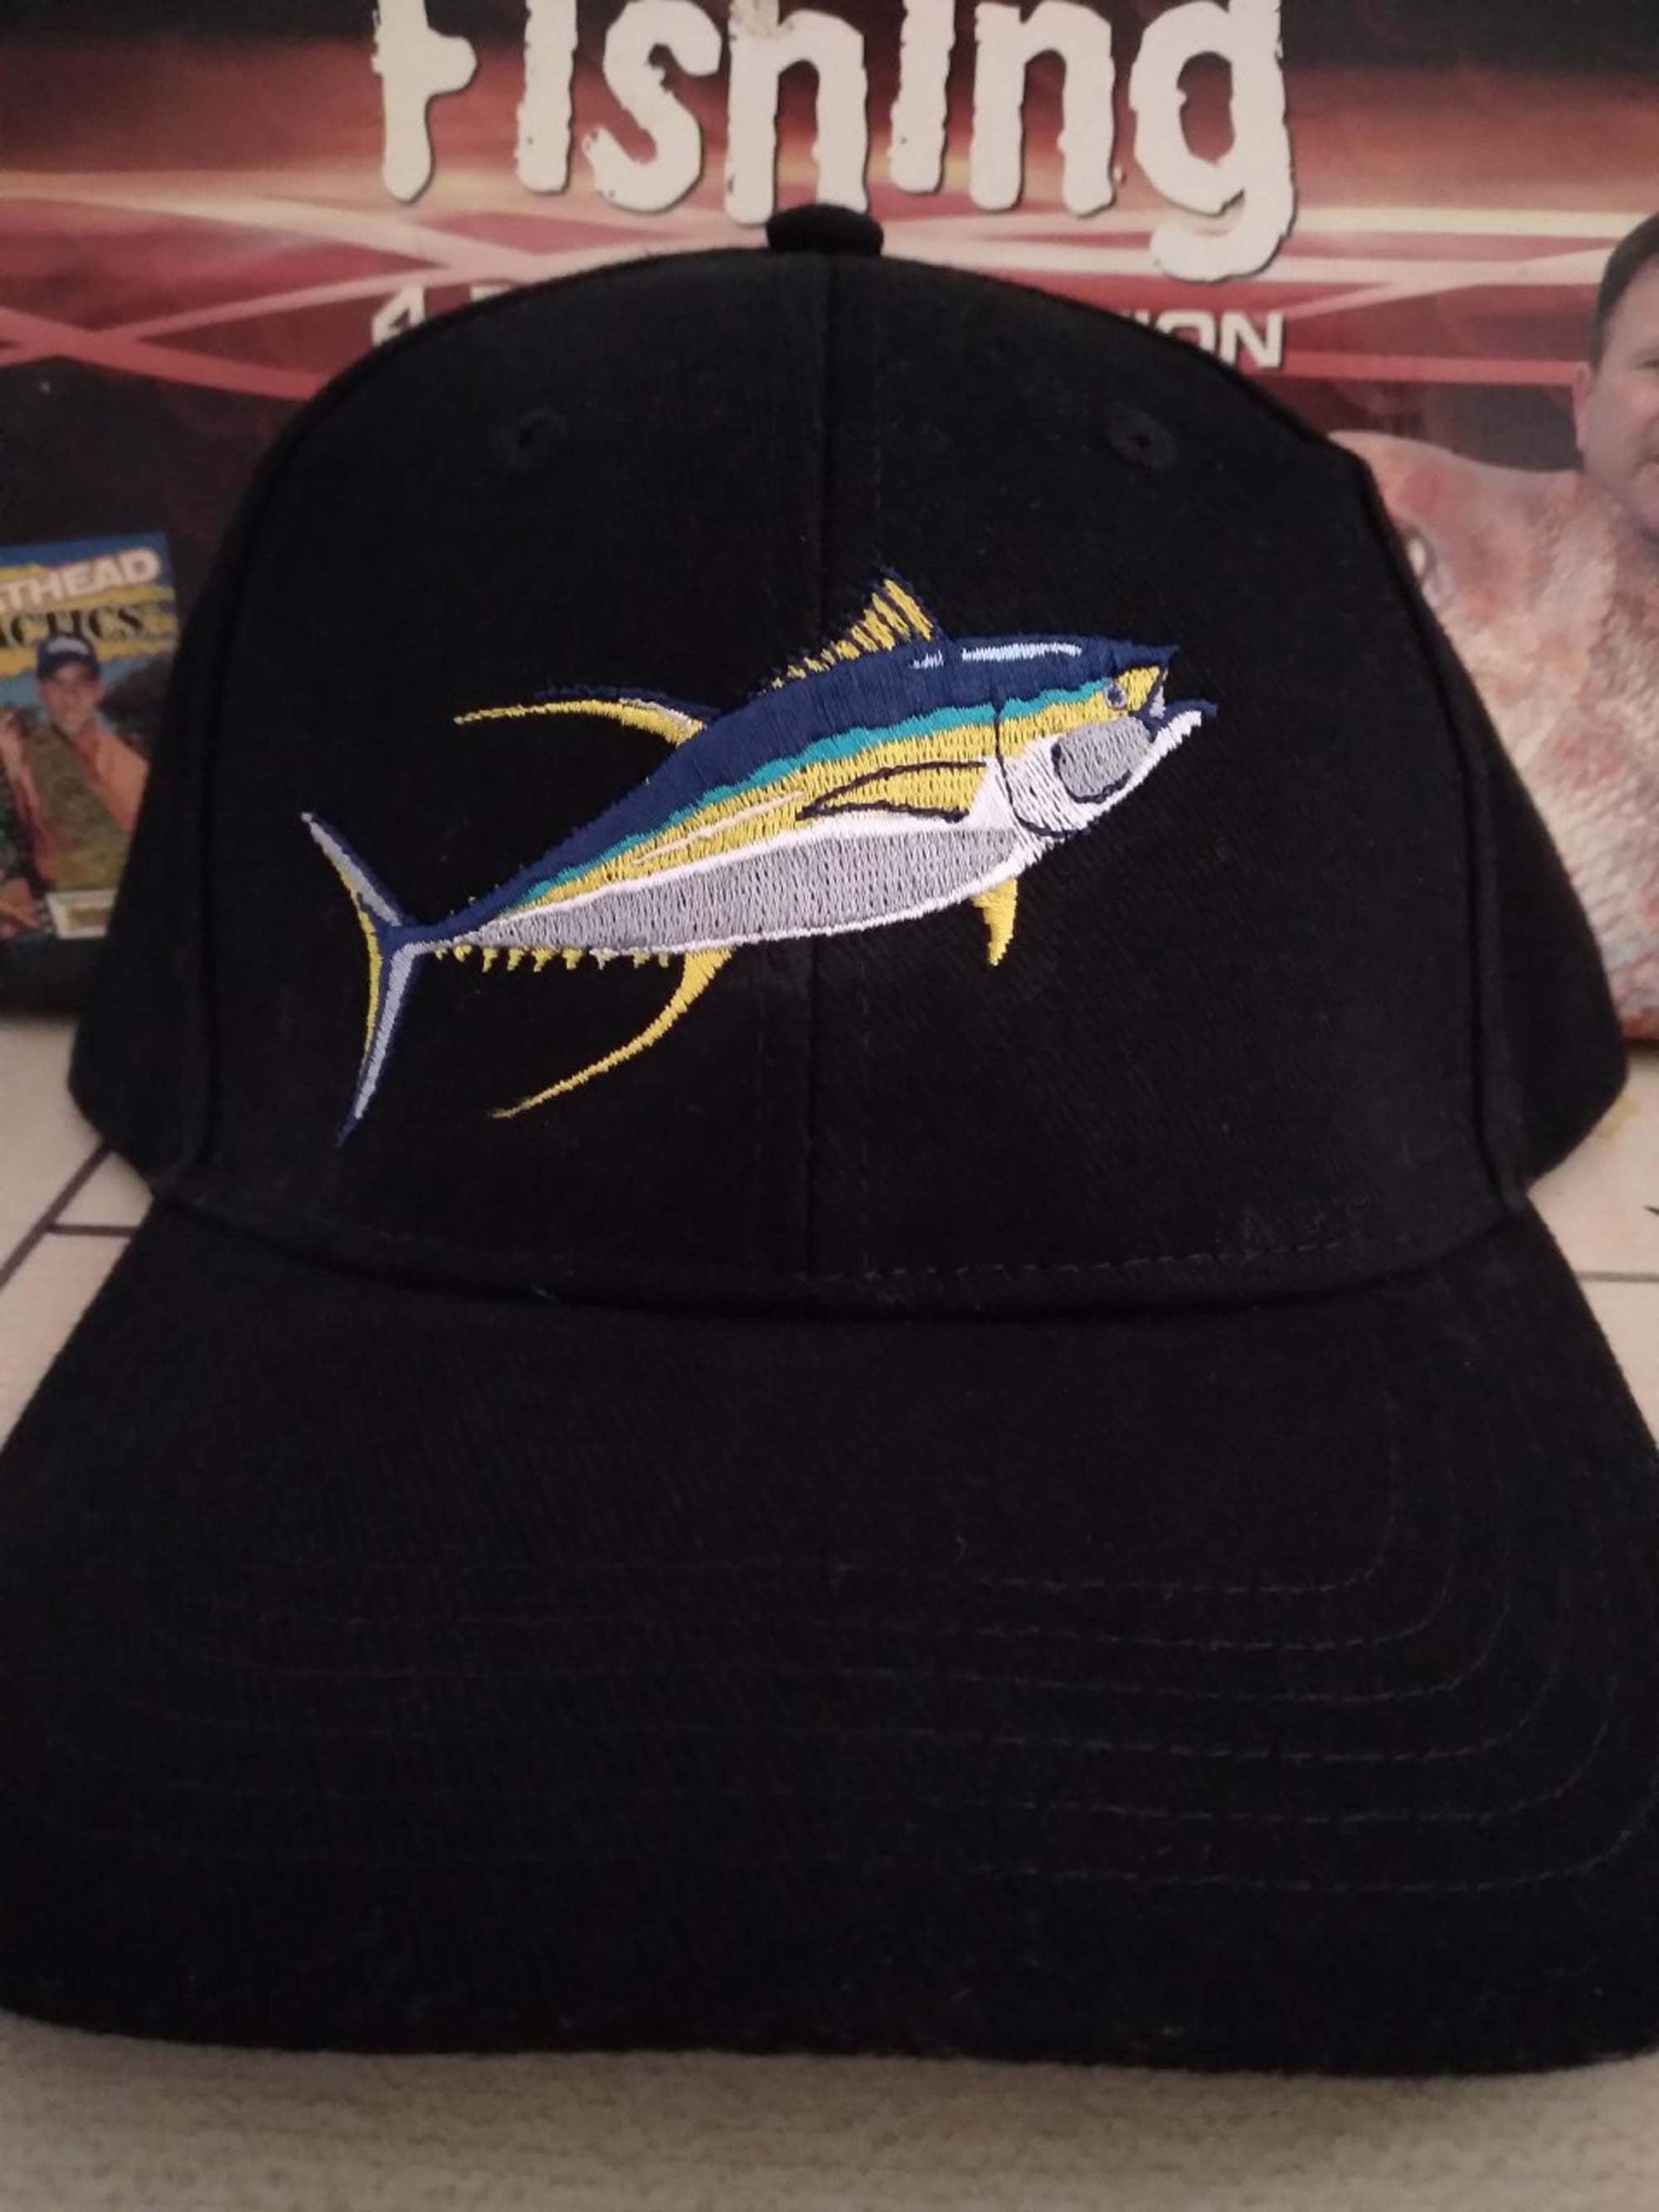 Tuna Fishing Cap, quality embroidery on brushed heavy cotton cap, velcro straps for adjustment, one size fits all.